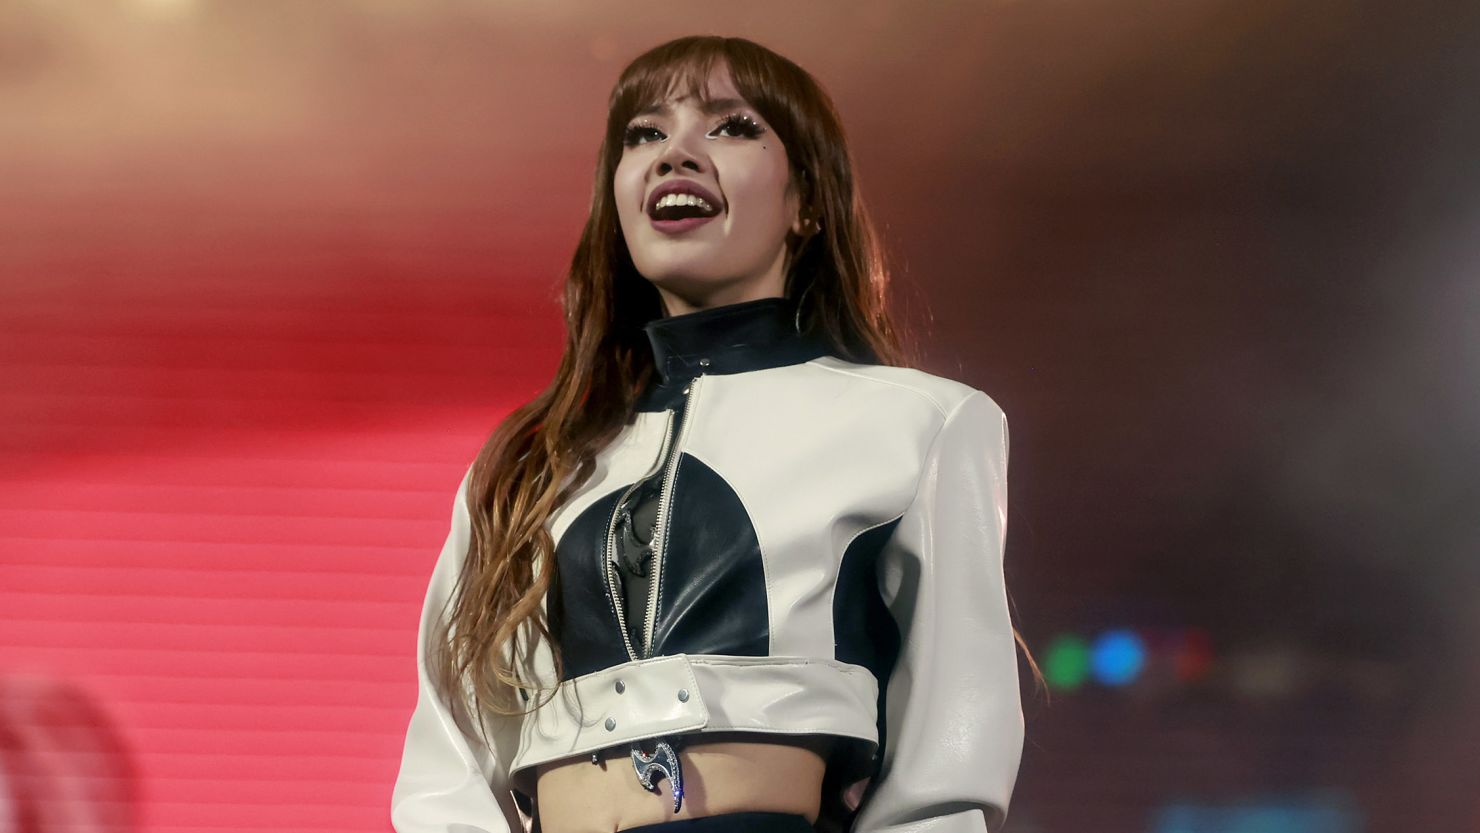 INDIO, CALIFORNIA - APRIL 22: Lisa of BLACKPINK performs at the Coachella Stage during the 2023 Coachella Valley Music and Arts Festival on April 22, 2023 in Indio, California. (Photo by Emma McIntyre/Getty Images for Coachella)